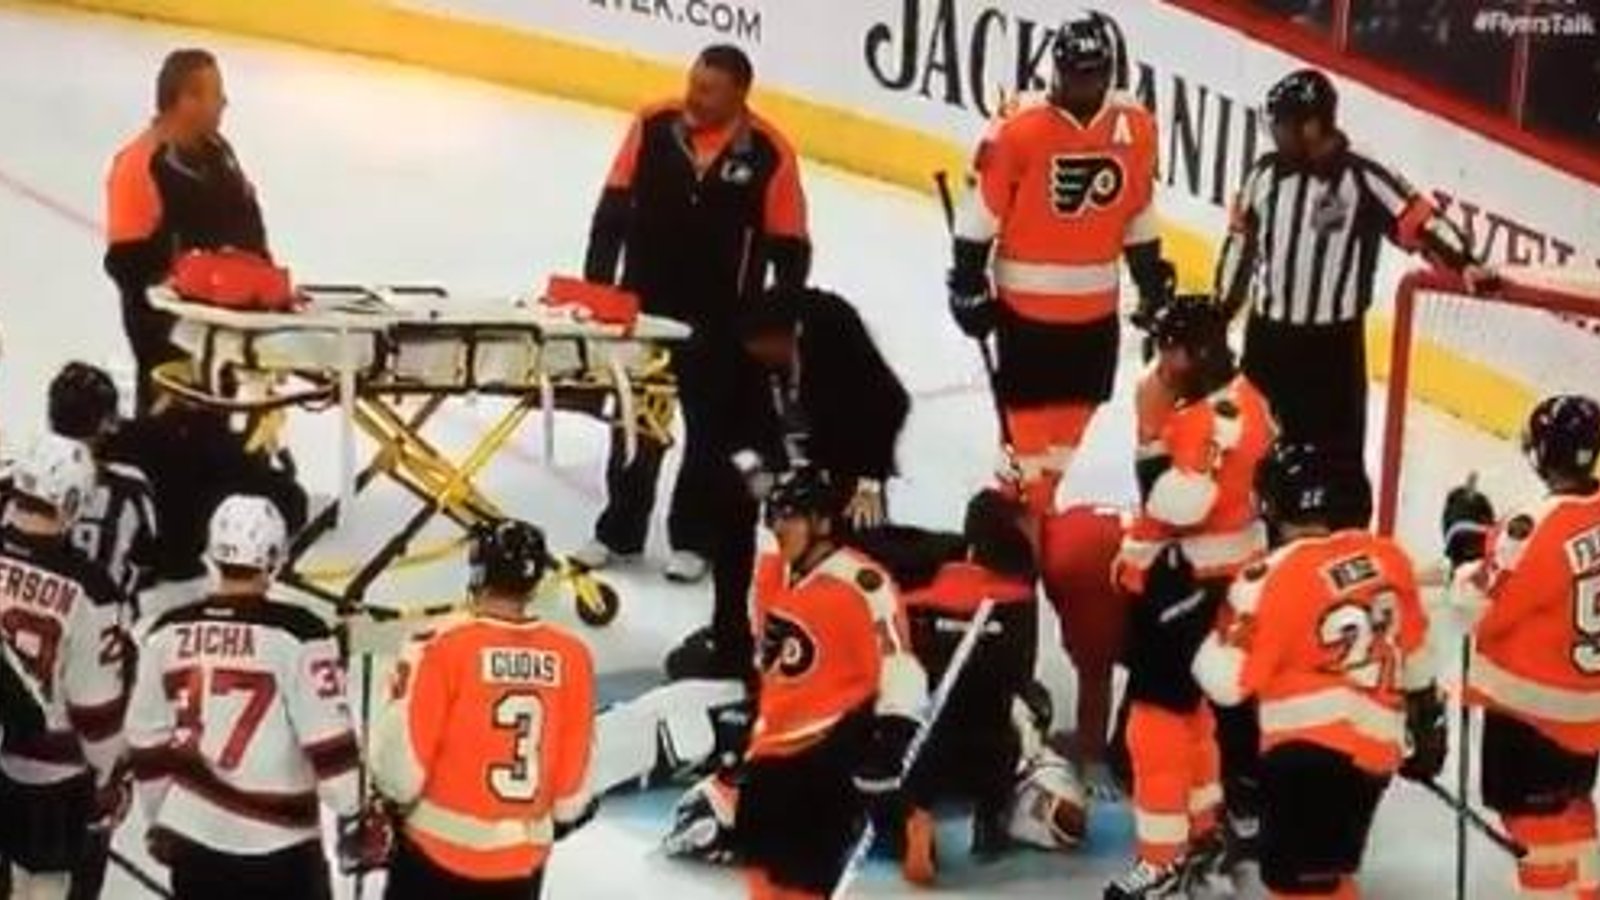 BREAKING : More details emerge about Neuvirth's condition. 